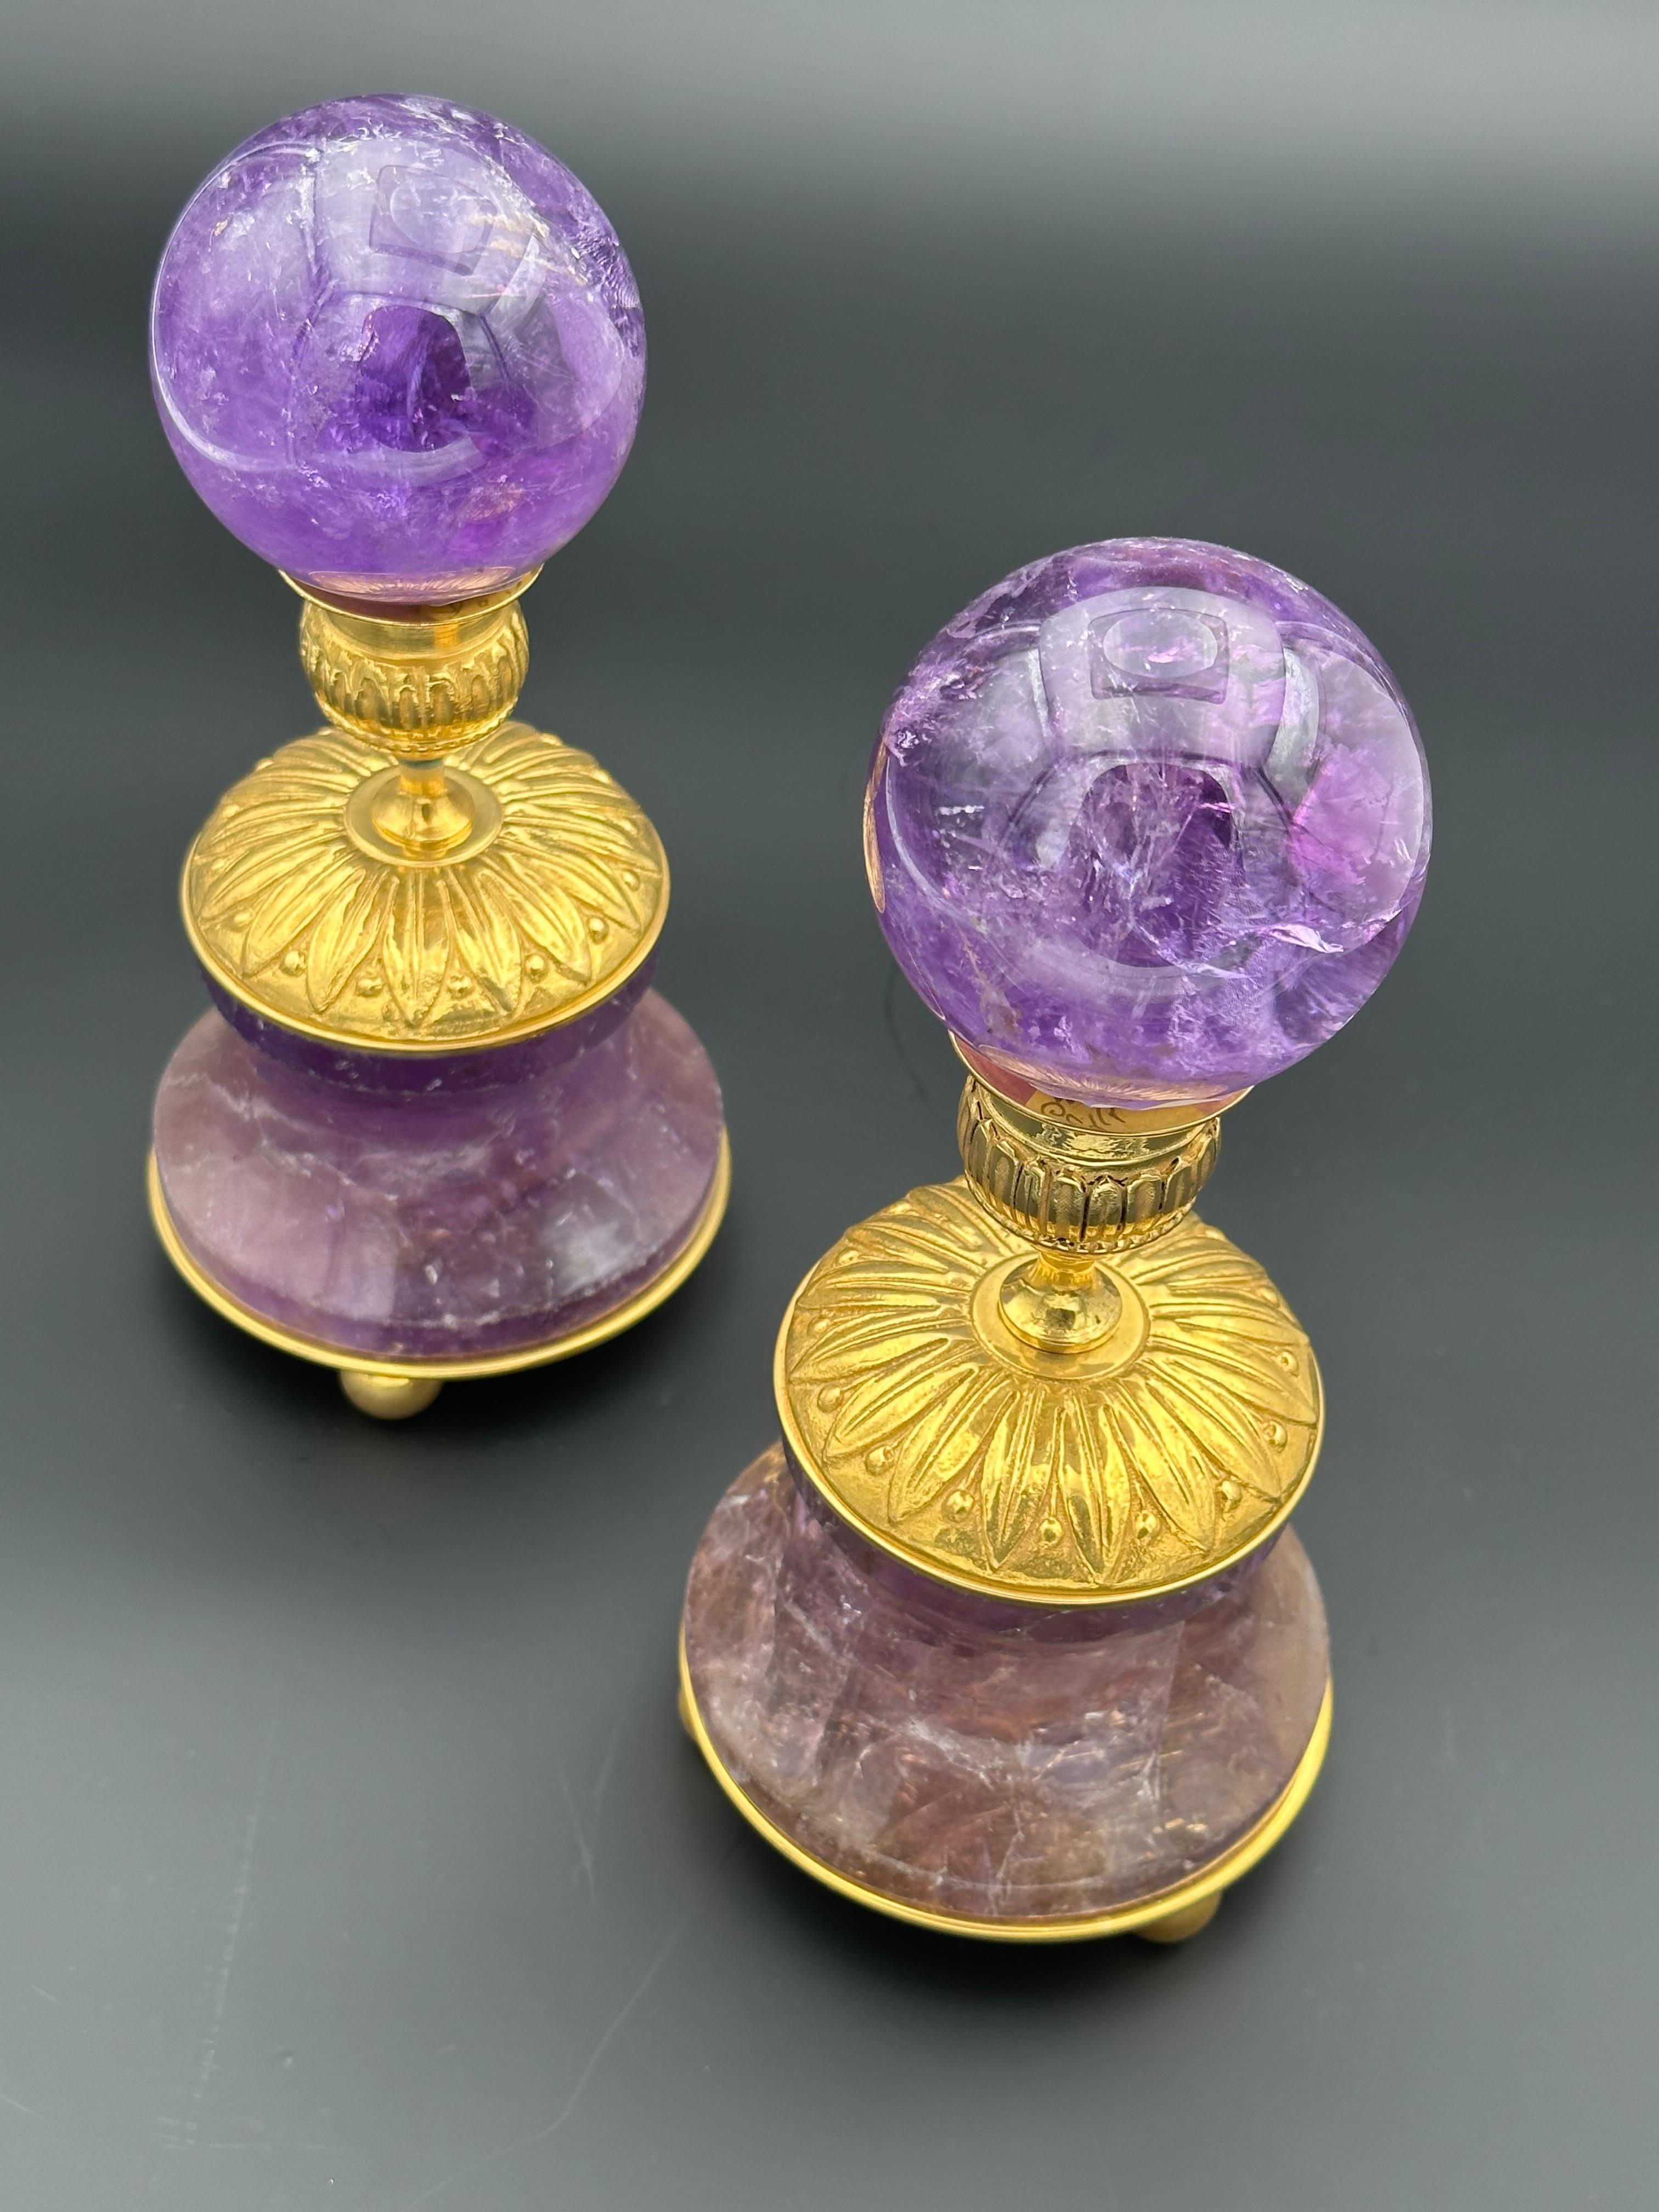 Amazing pair of amethyst spheres with their amethyst supports.
The supports could be also used separately as candlesticks.
Made in FRANCE 